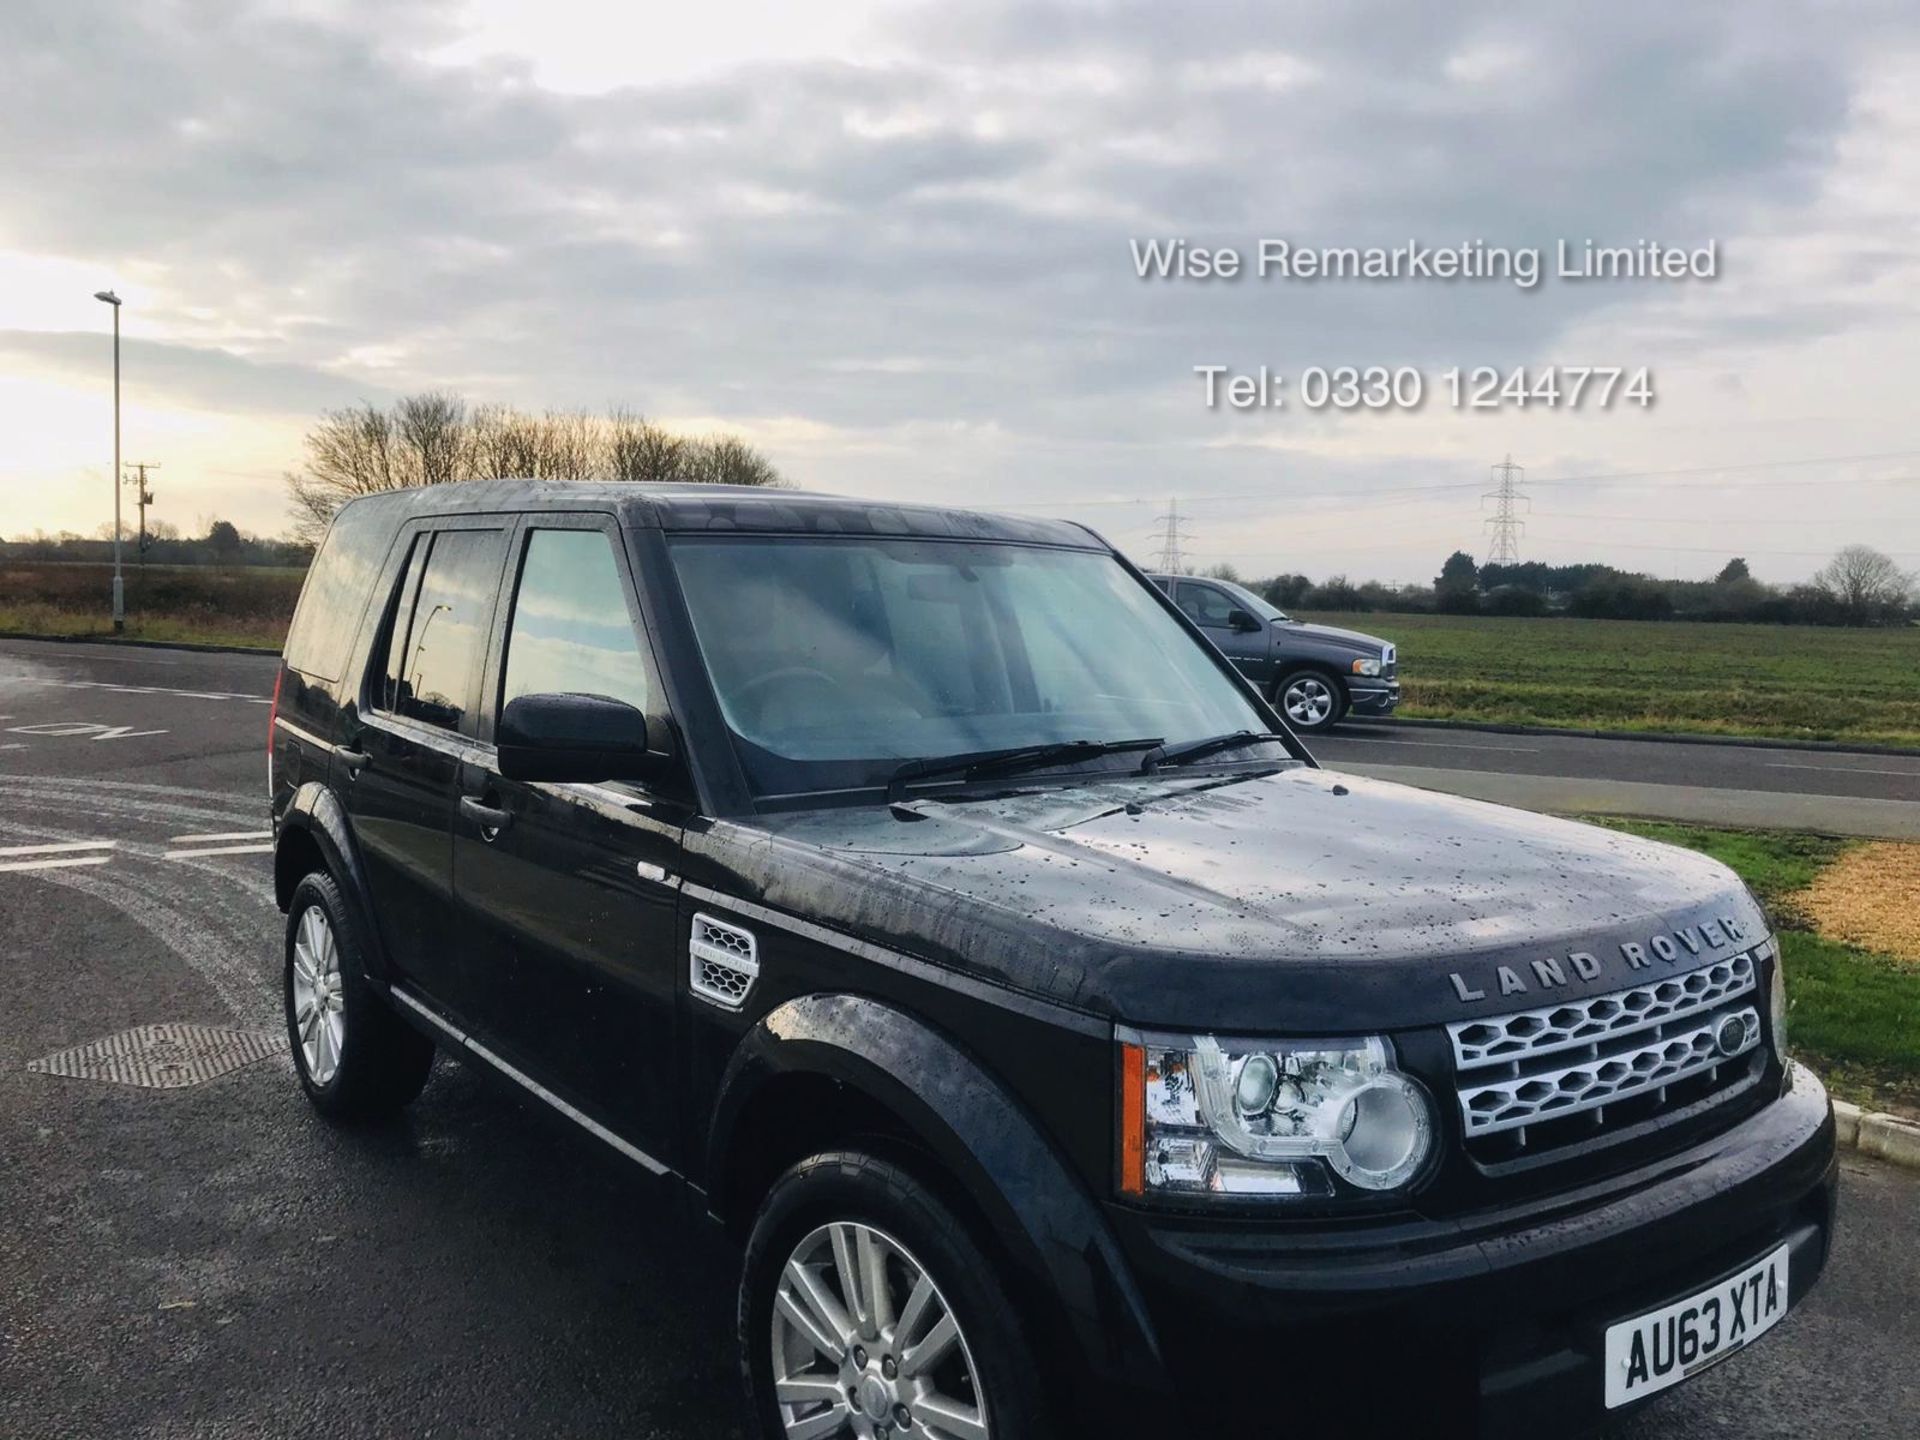 Land Rover Discovery GS 3.0 SDV6 Auto - 2014 Model - 7 Seater - 1 Owner From New